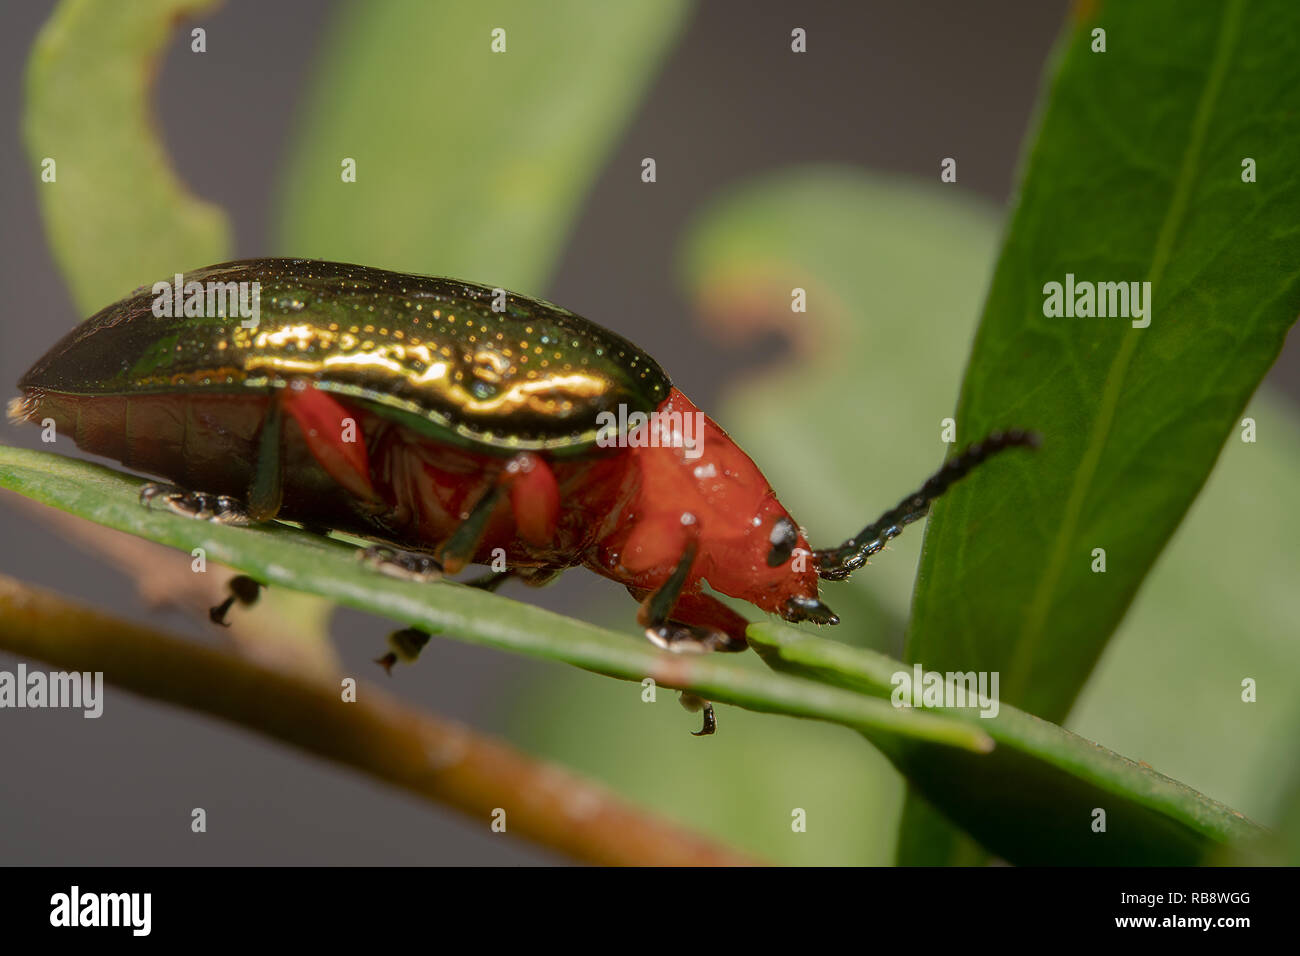 Orange/Red blue Narrow necked Leaf Beetle sitting on a leaf with its antennas up, side view Stock Photo